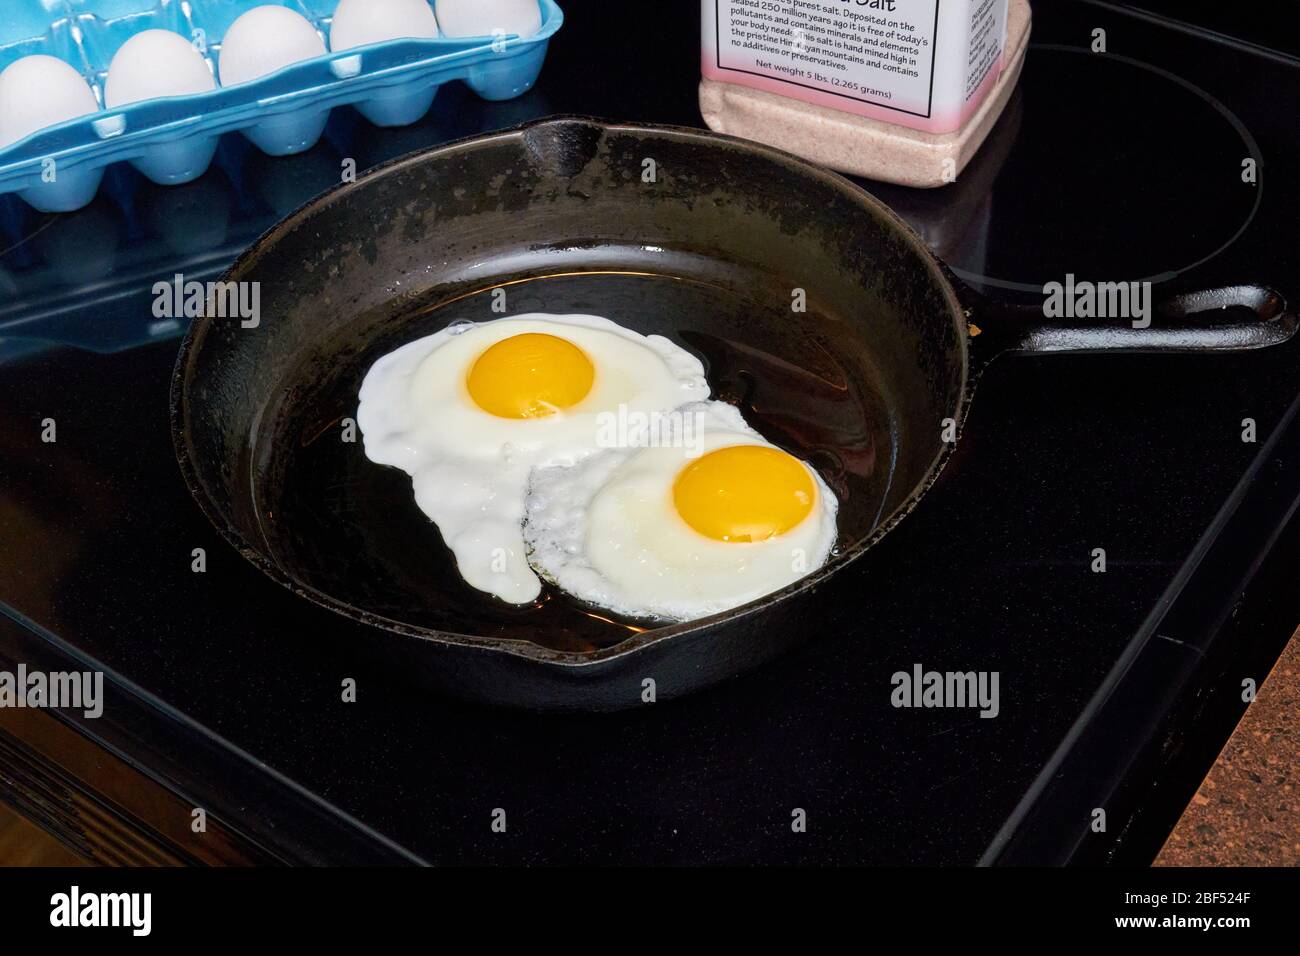 Breakfast Two sunny side up eggs fsliding out of a cast iron skillet on white plate Stock Photo